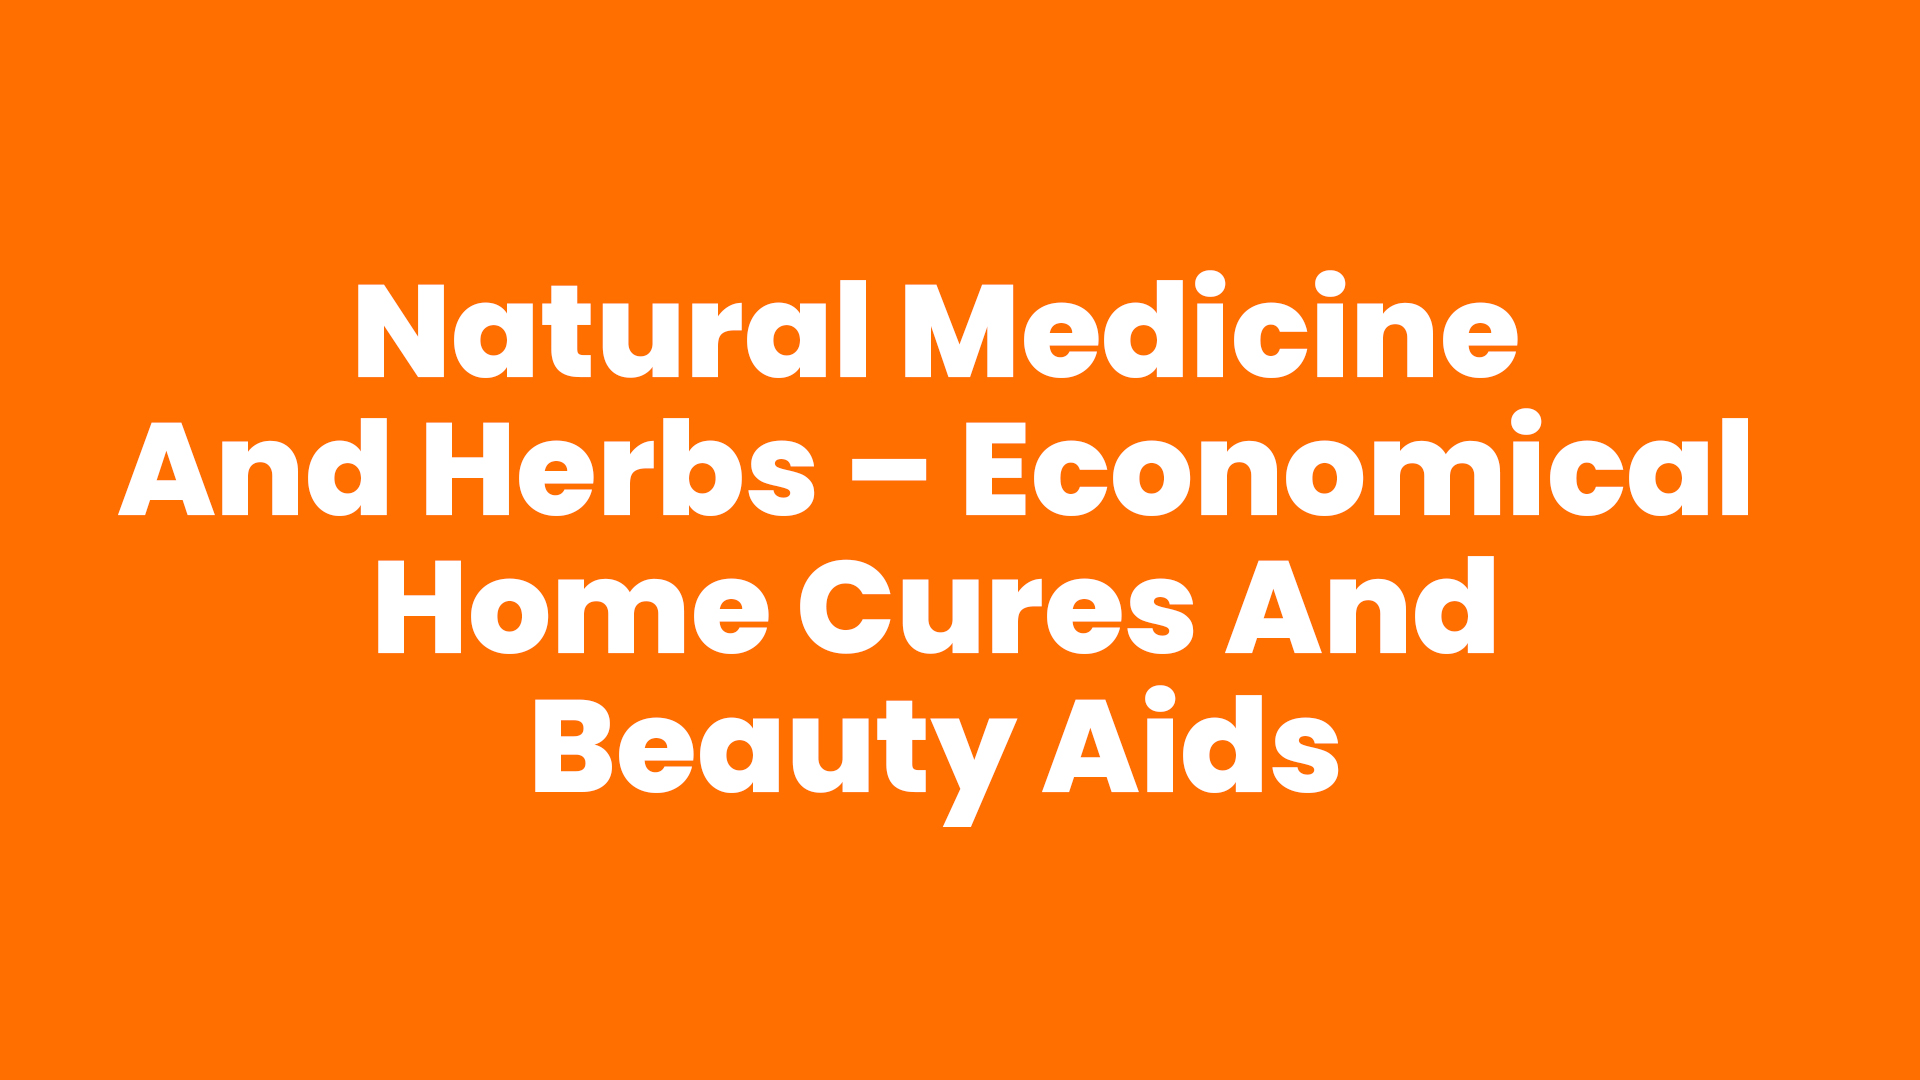 Natural Medicine And Herbs – Economical Home Cures And Beauty Aids